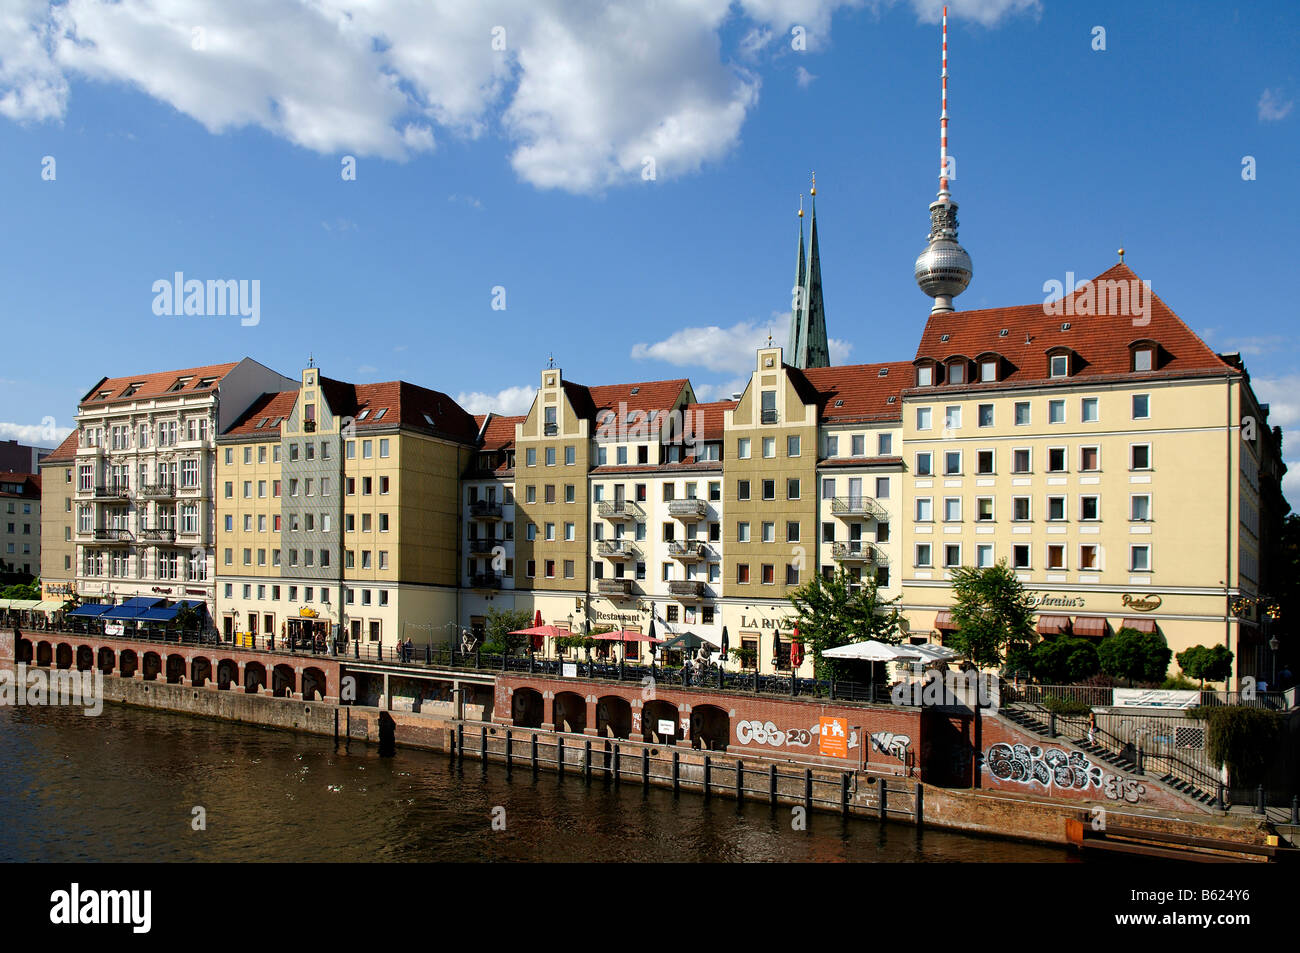 Nikolaiviertel, Nikolai Quarter, from the Spree River side, in front of the Fernsehturm, television tower, Berlin, Germany, Eur Stock Photo